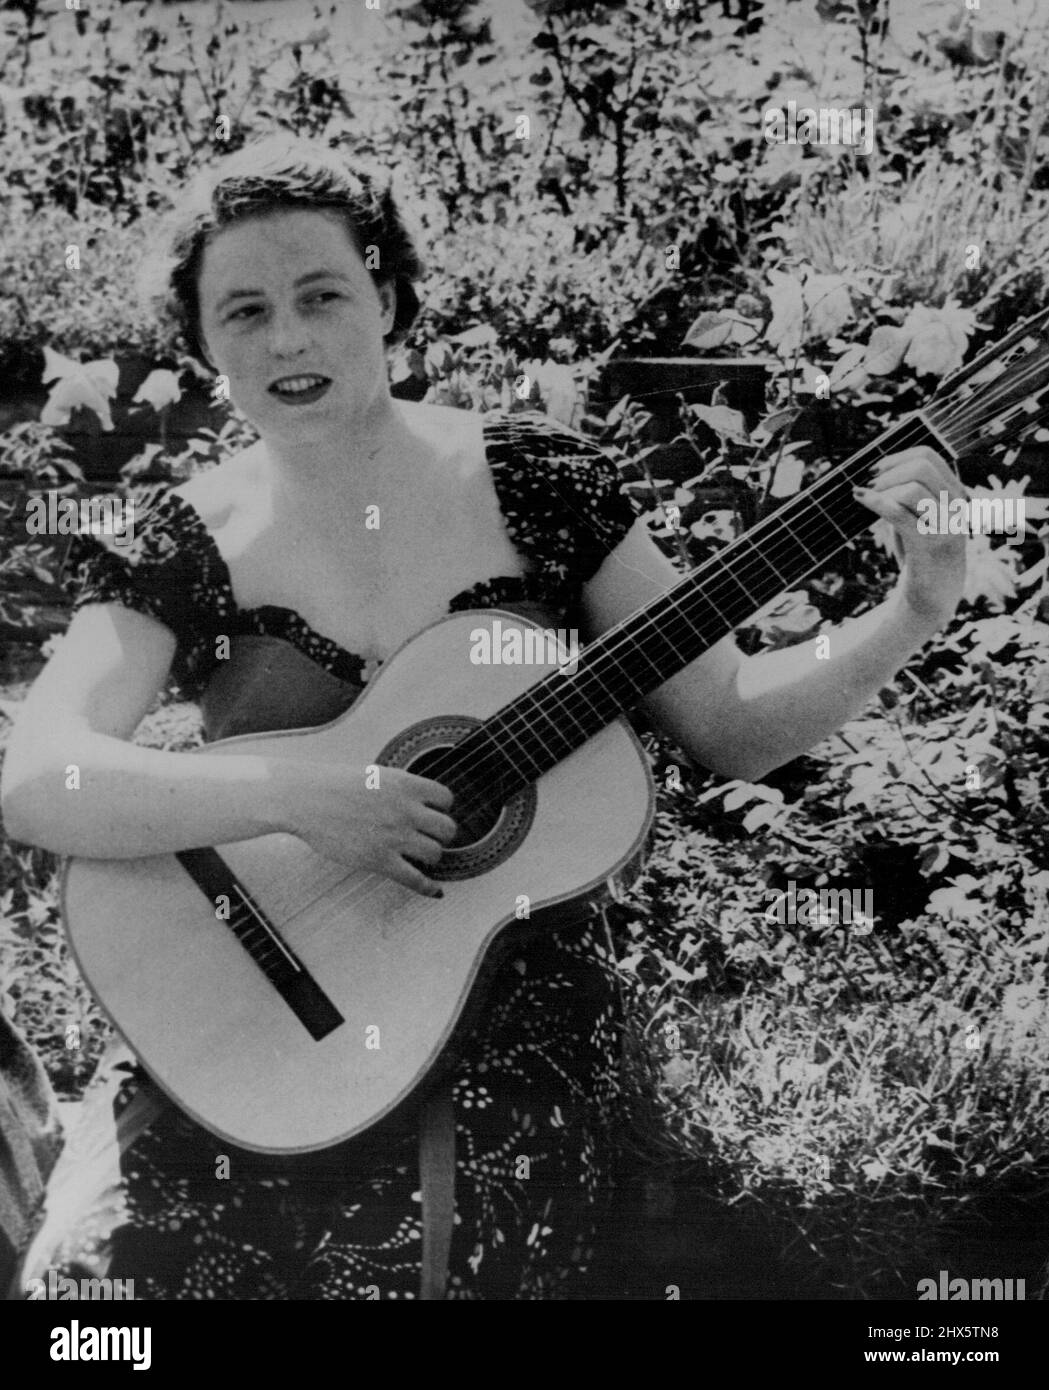 You Do Know Her -- Recognise her? She's a British girl known to audiences all over the world, but not for her guitar playing. Horsewoman Miss Pat Smythe was relaxing in the garden with the six-string Spanish guitar which is one of her favorite out-of-saddle pastimes. August 16, 1955. (Photo by Reuter Photo). Stock Photo